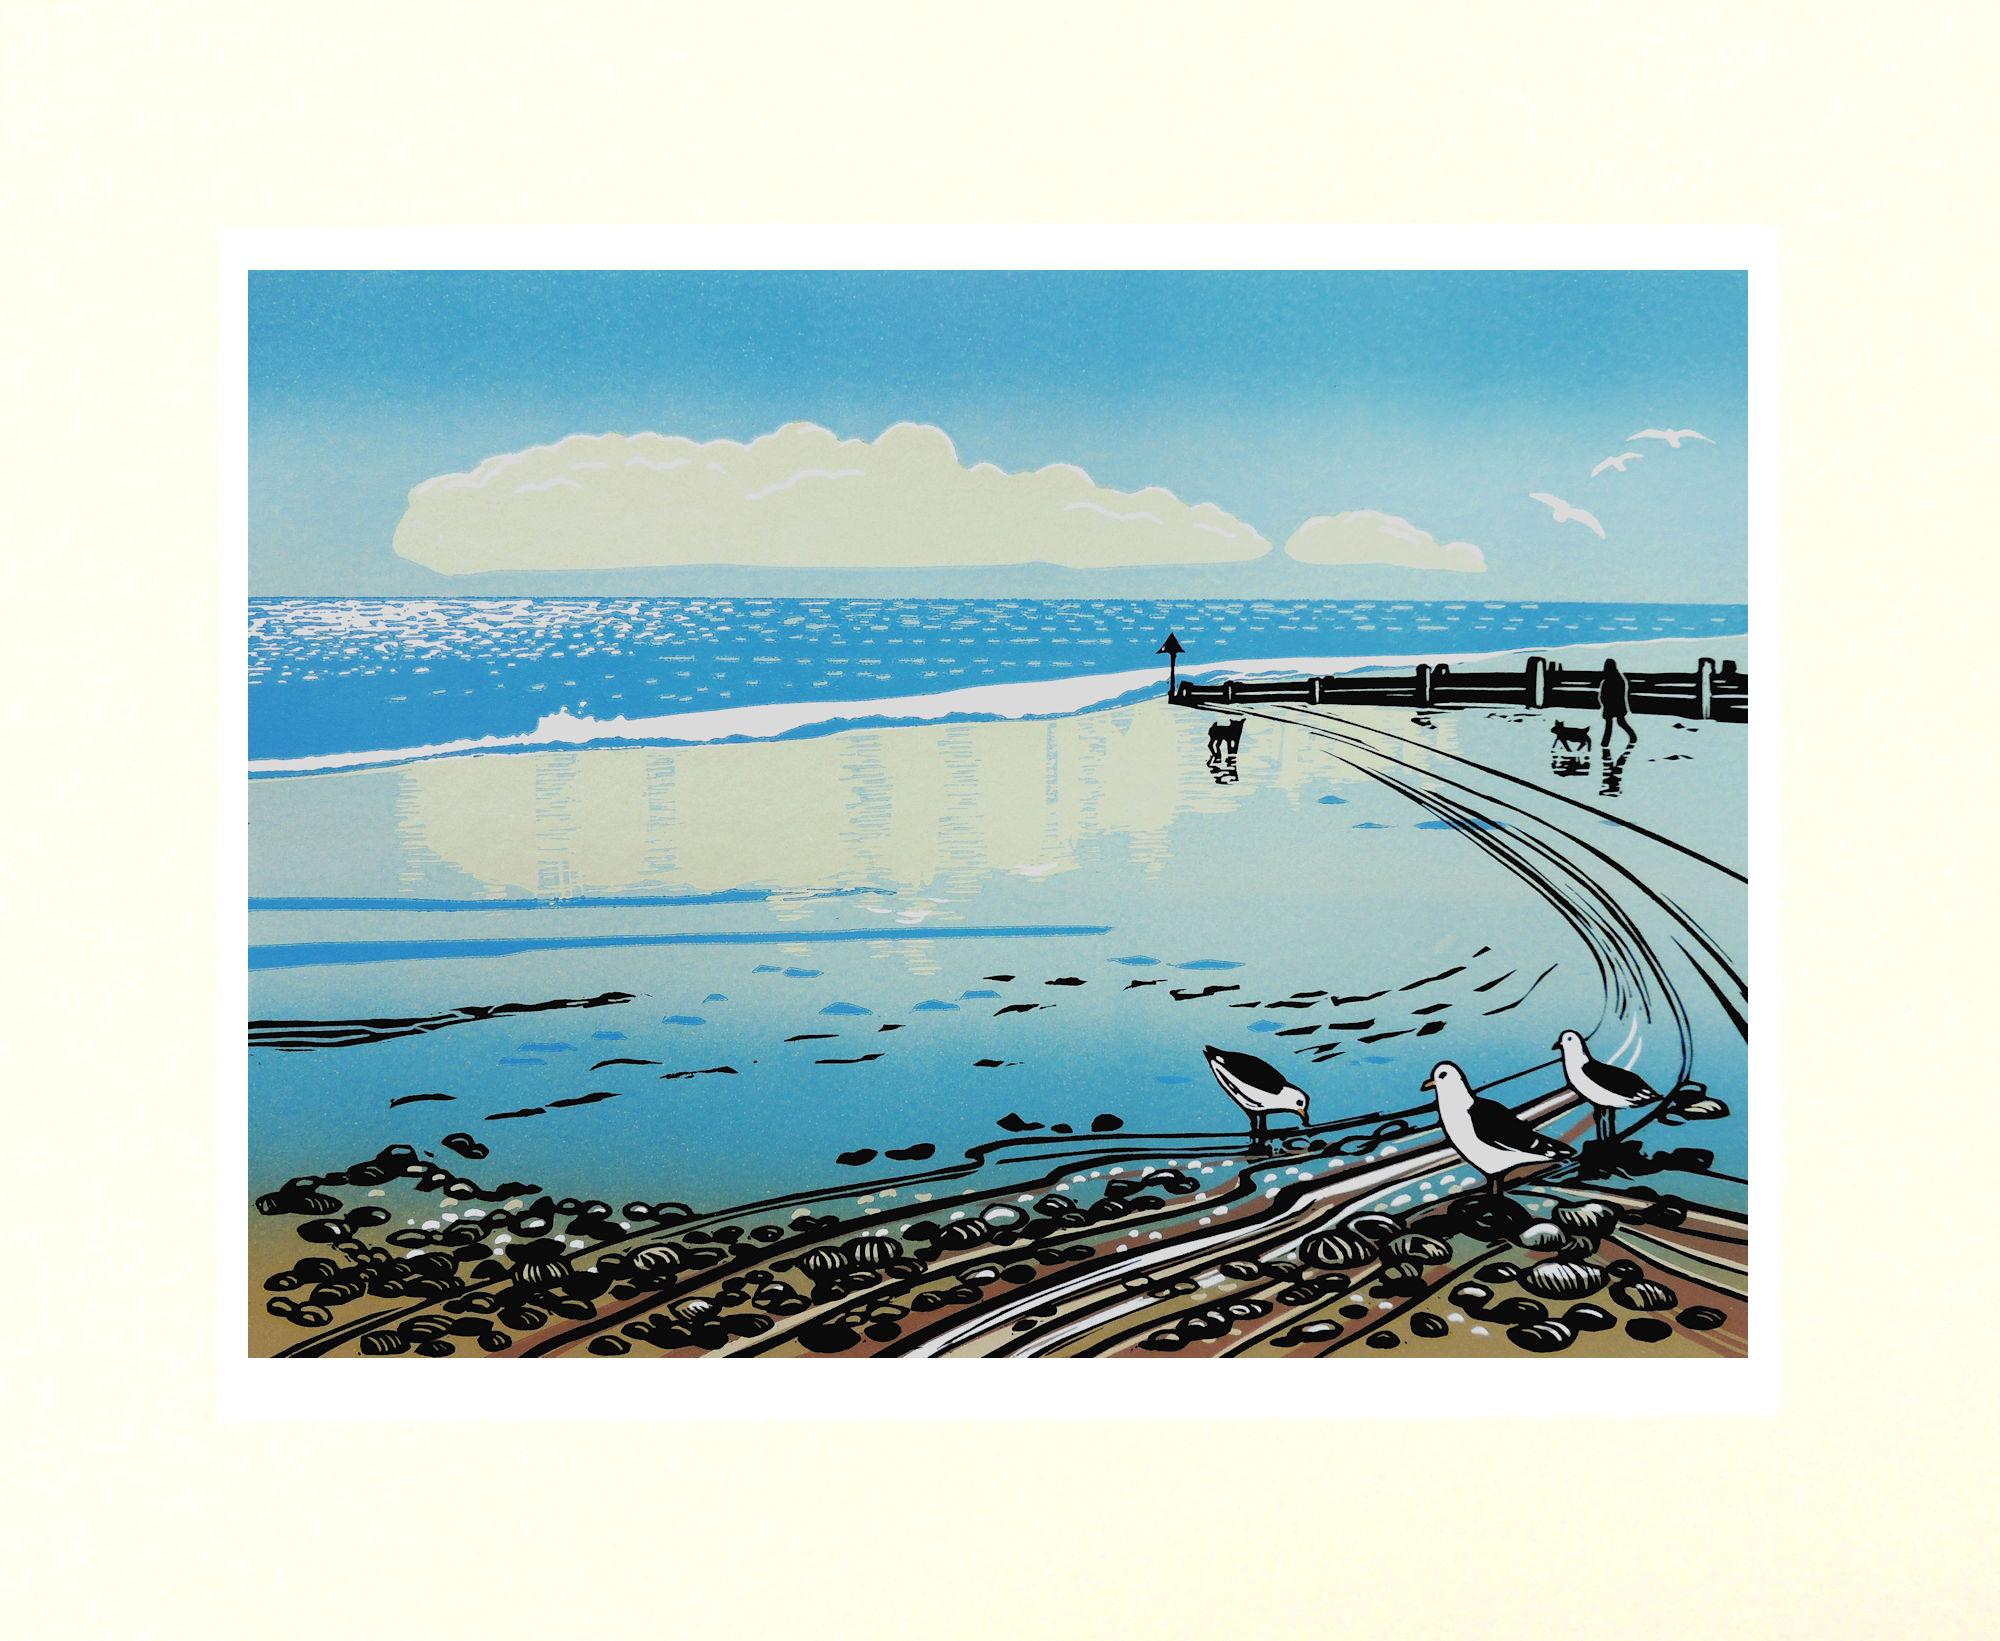 On a bright sunlit day at the coast, I was inspired by a cloud reflection on the wet sand. It was dramatic and completed by seeing a dog walker in the distance. The linocut is all about light, reflections and atmosphere.

Additional